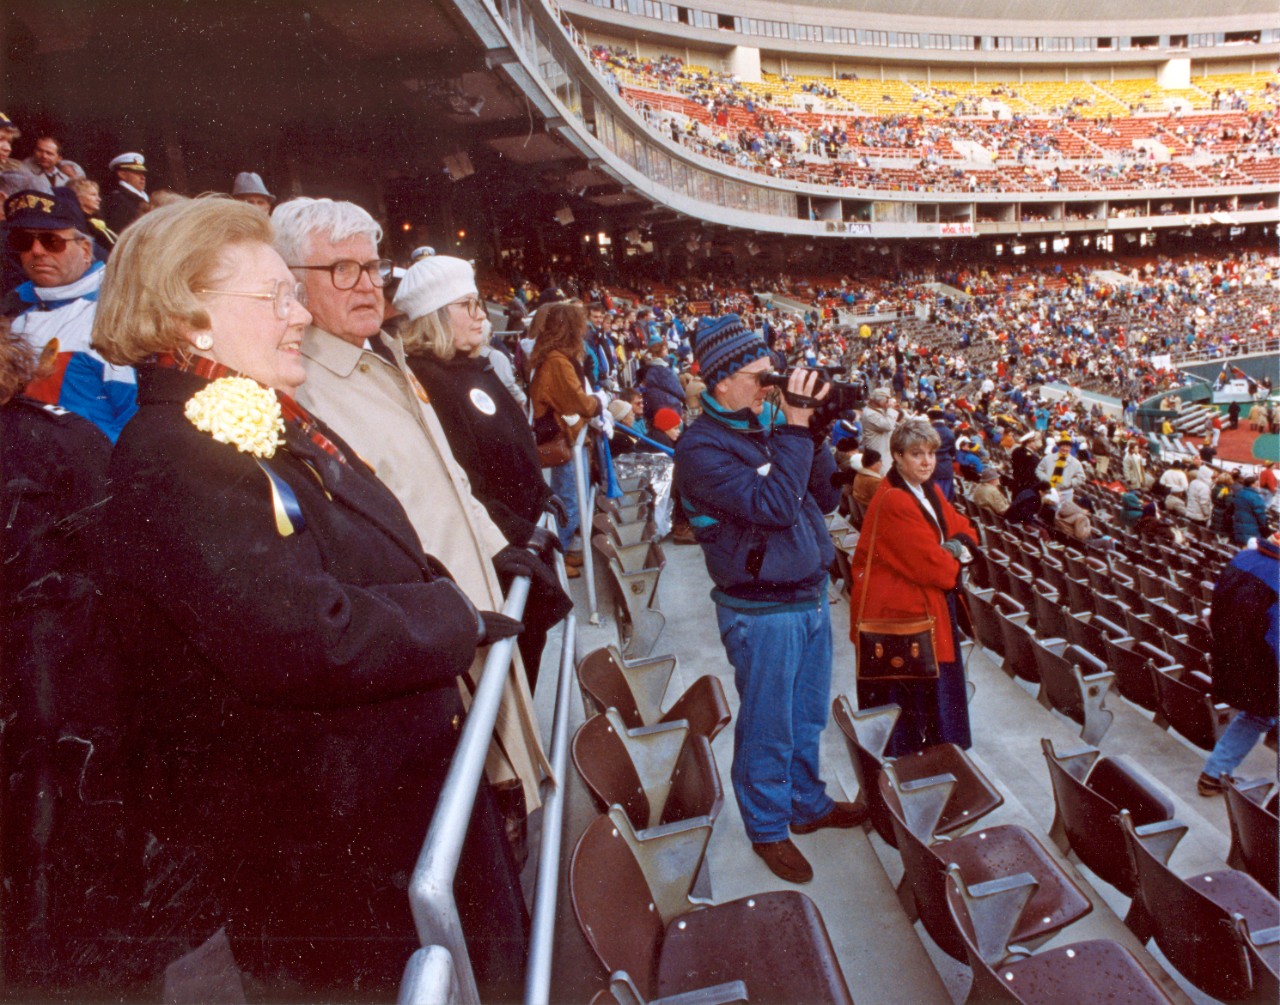 <p>VADM James B. Stockdale and Mrs. Stockdale attend a Navy football game. Undated photograph.</p>
